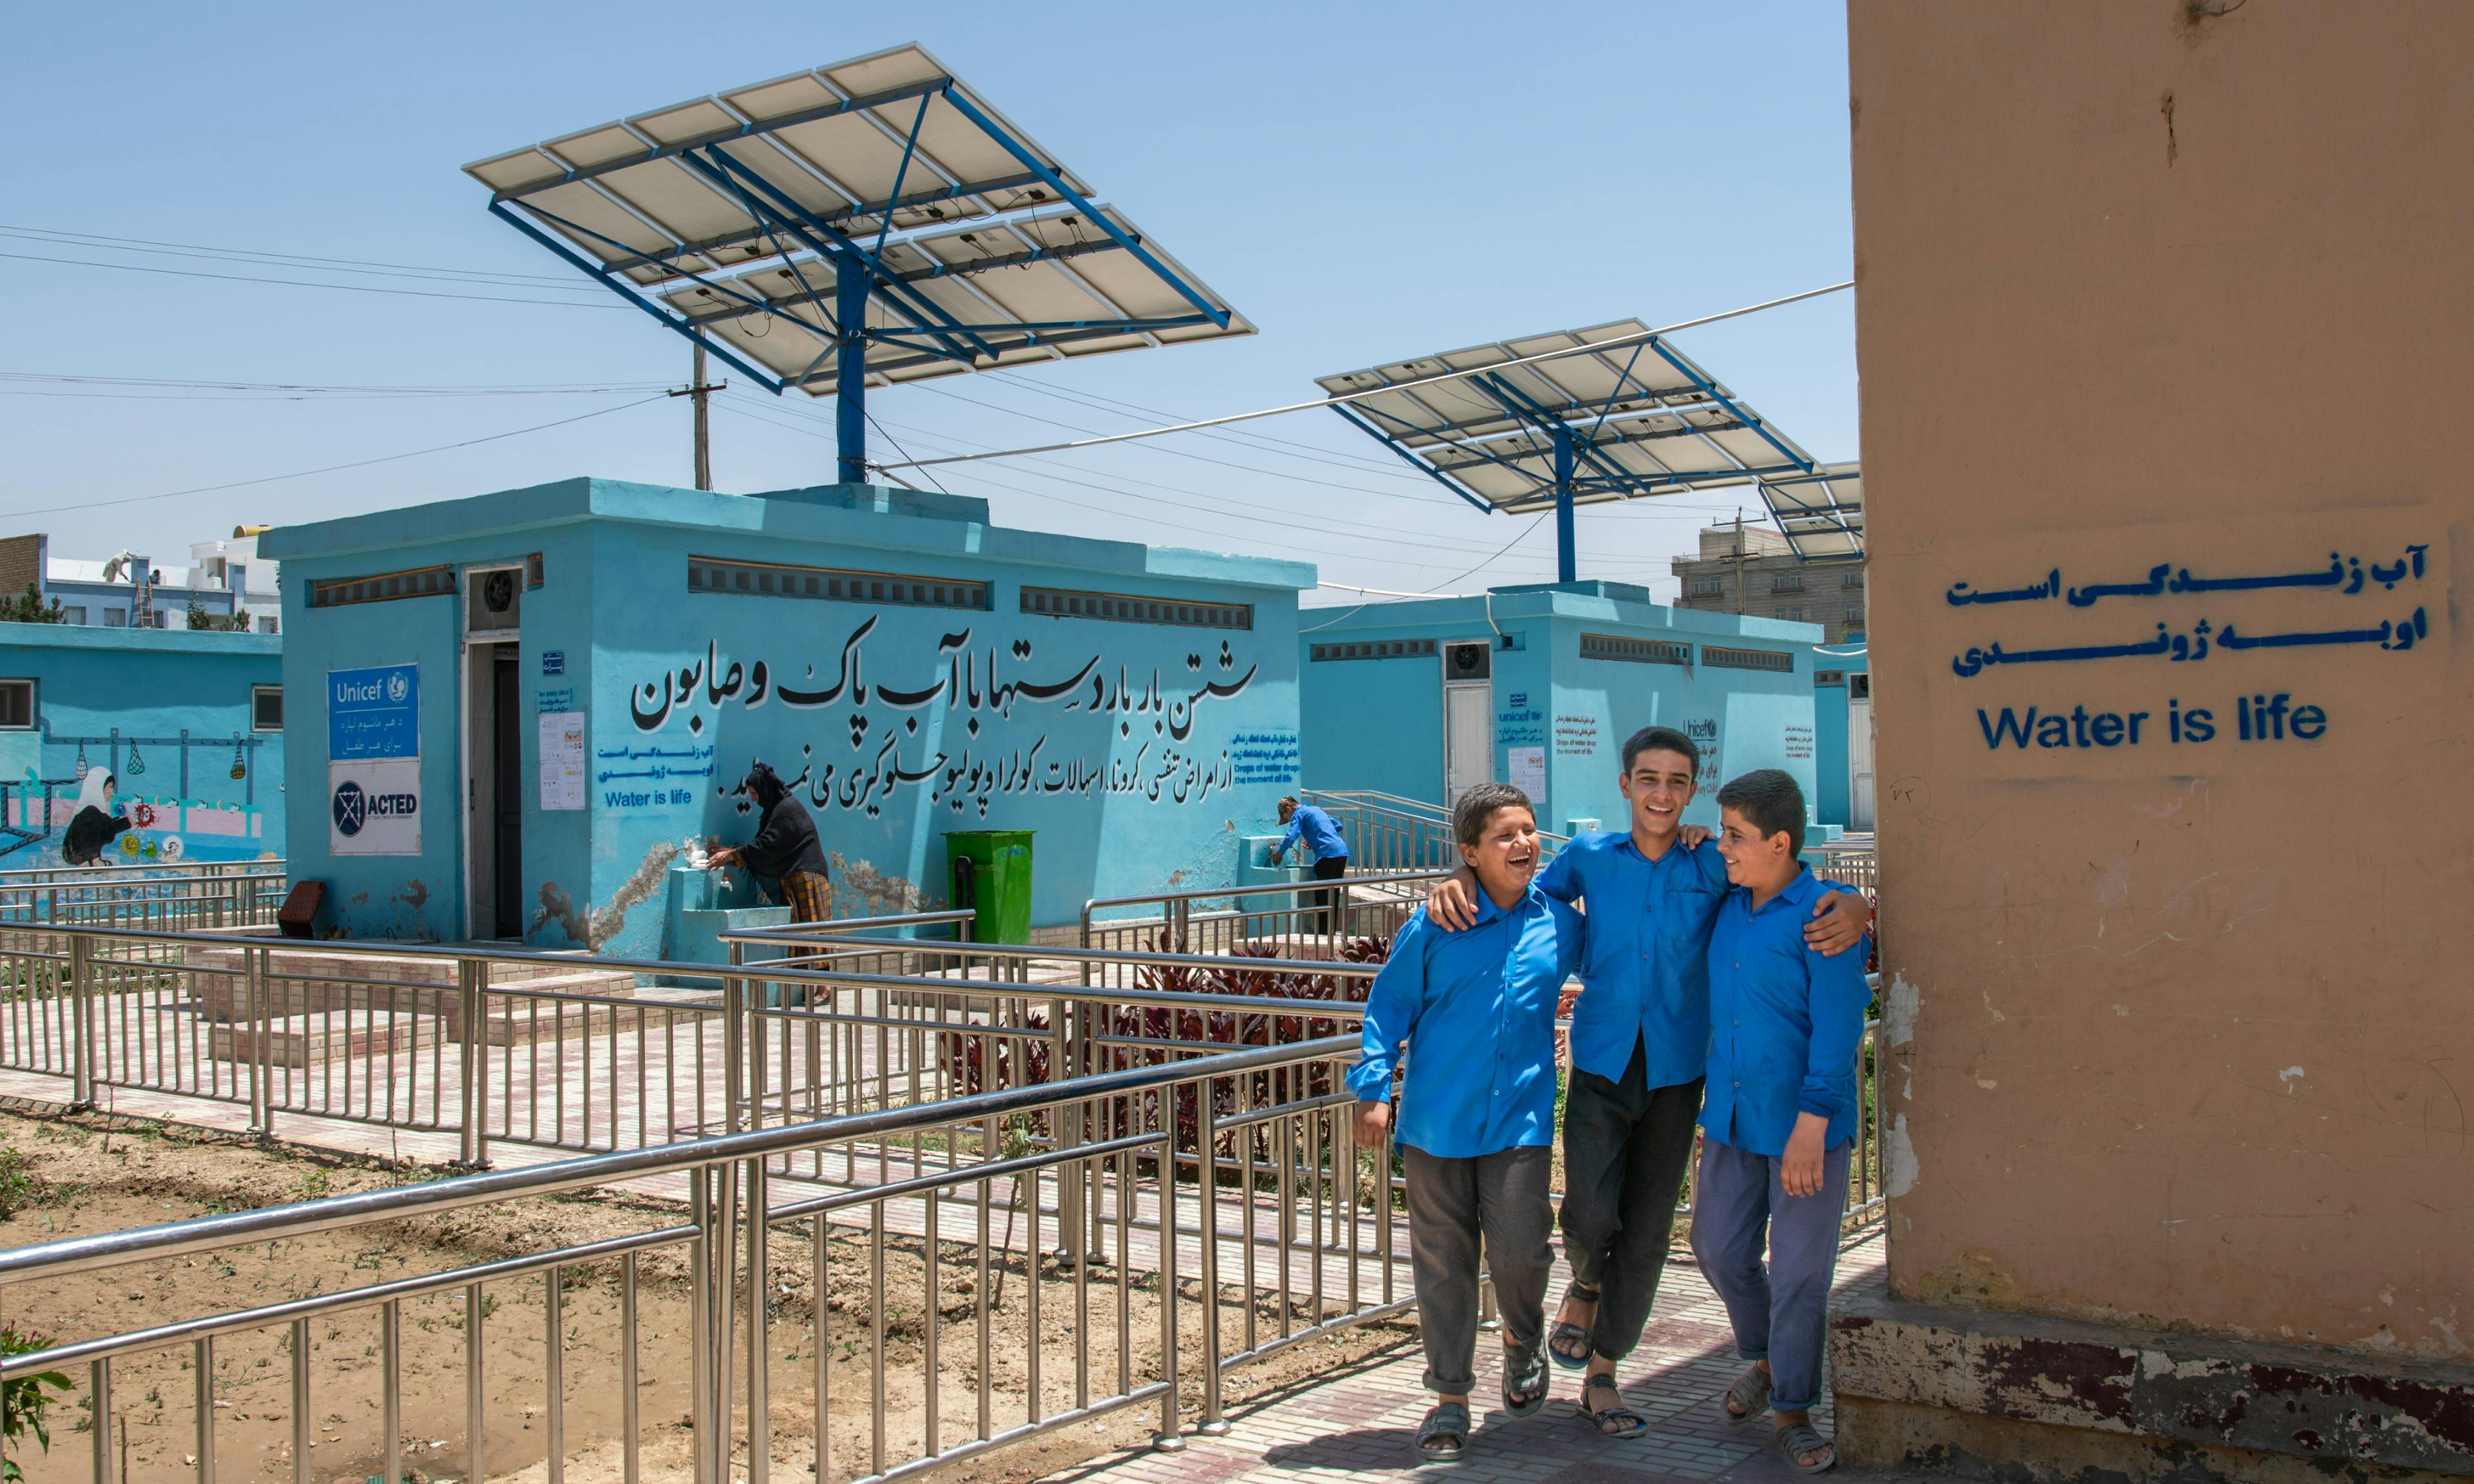 Global Parent- A group of students walk into the newly constructed latrines at Mawlana Jalaluddin Mohammad Balkhi School in Mazar-i-Sharīf, Balkh Province, Afghanistan